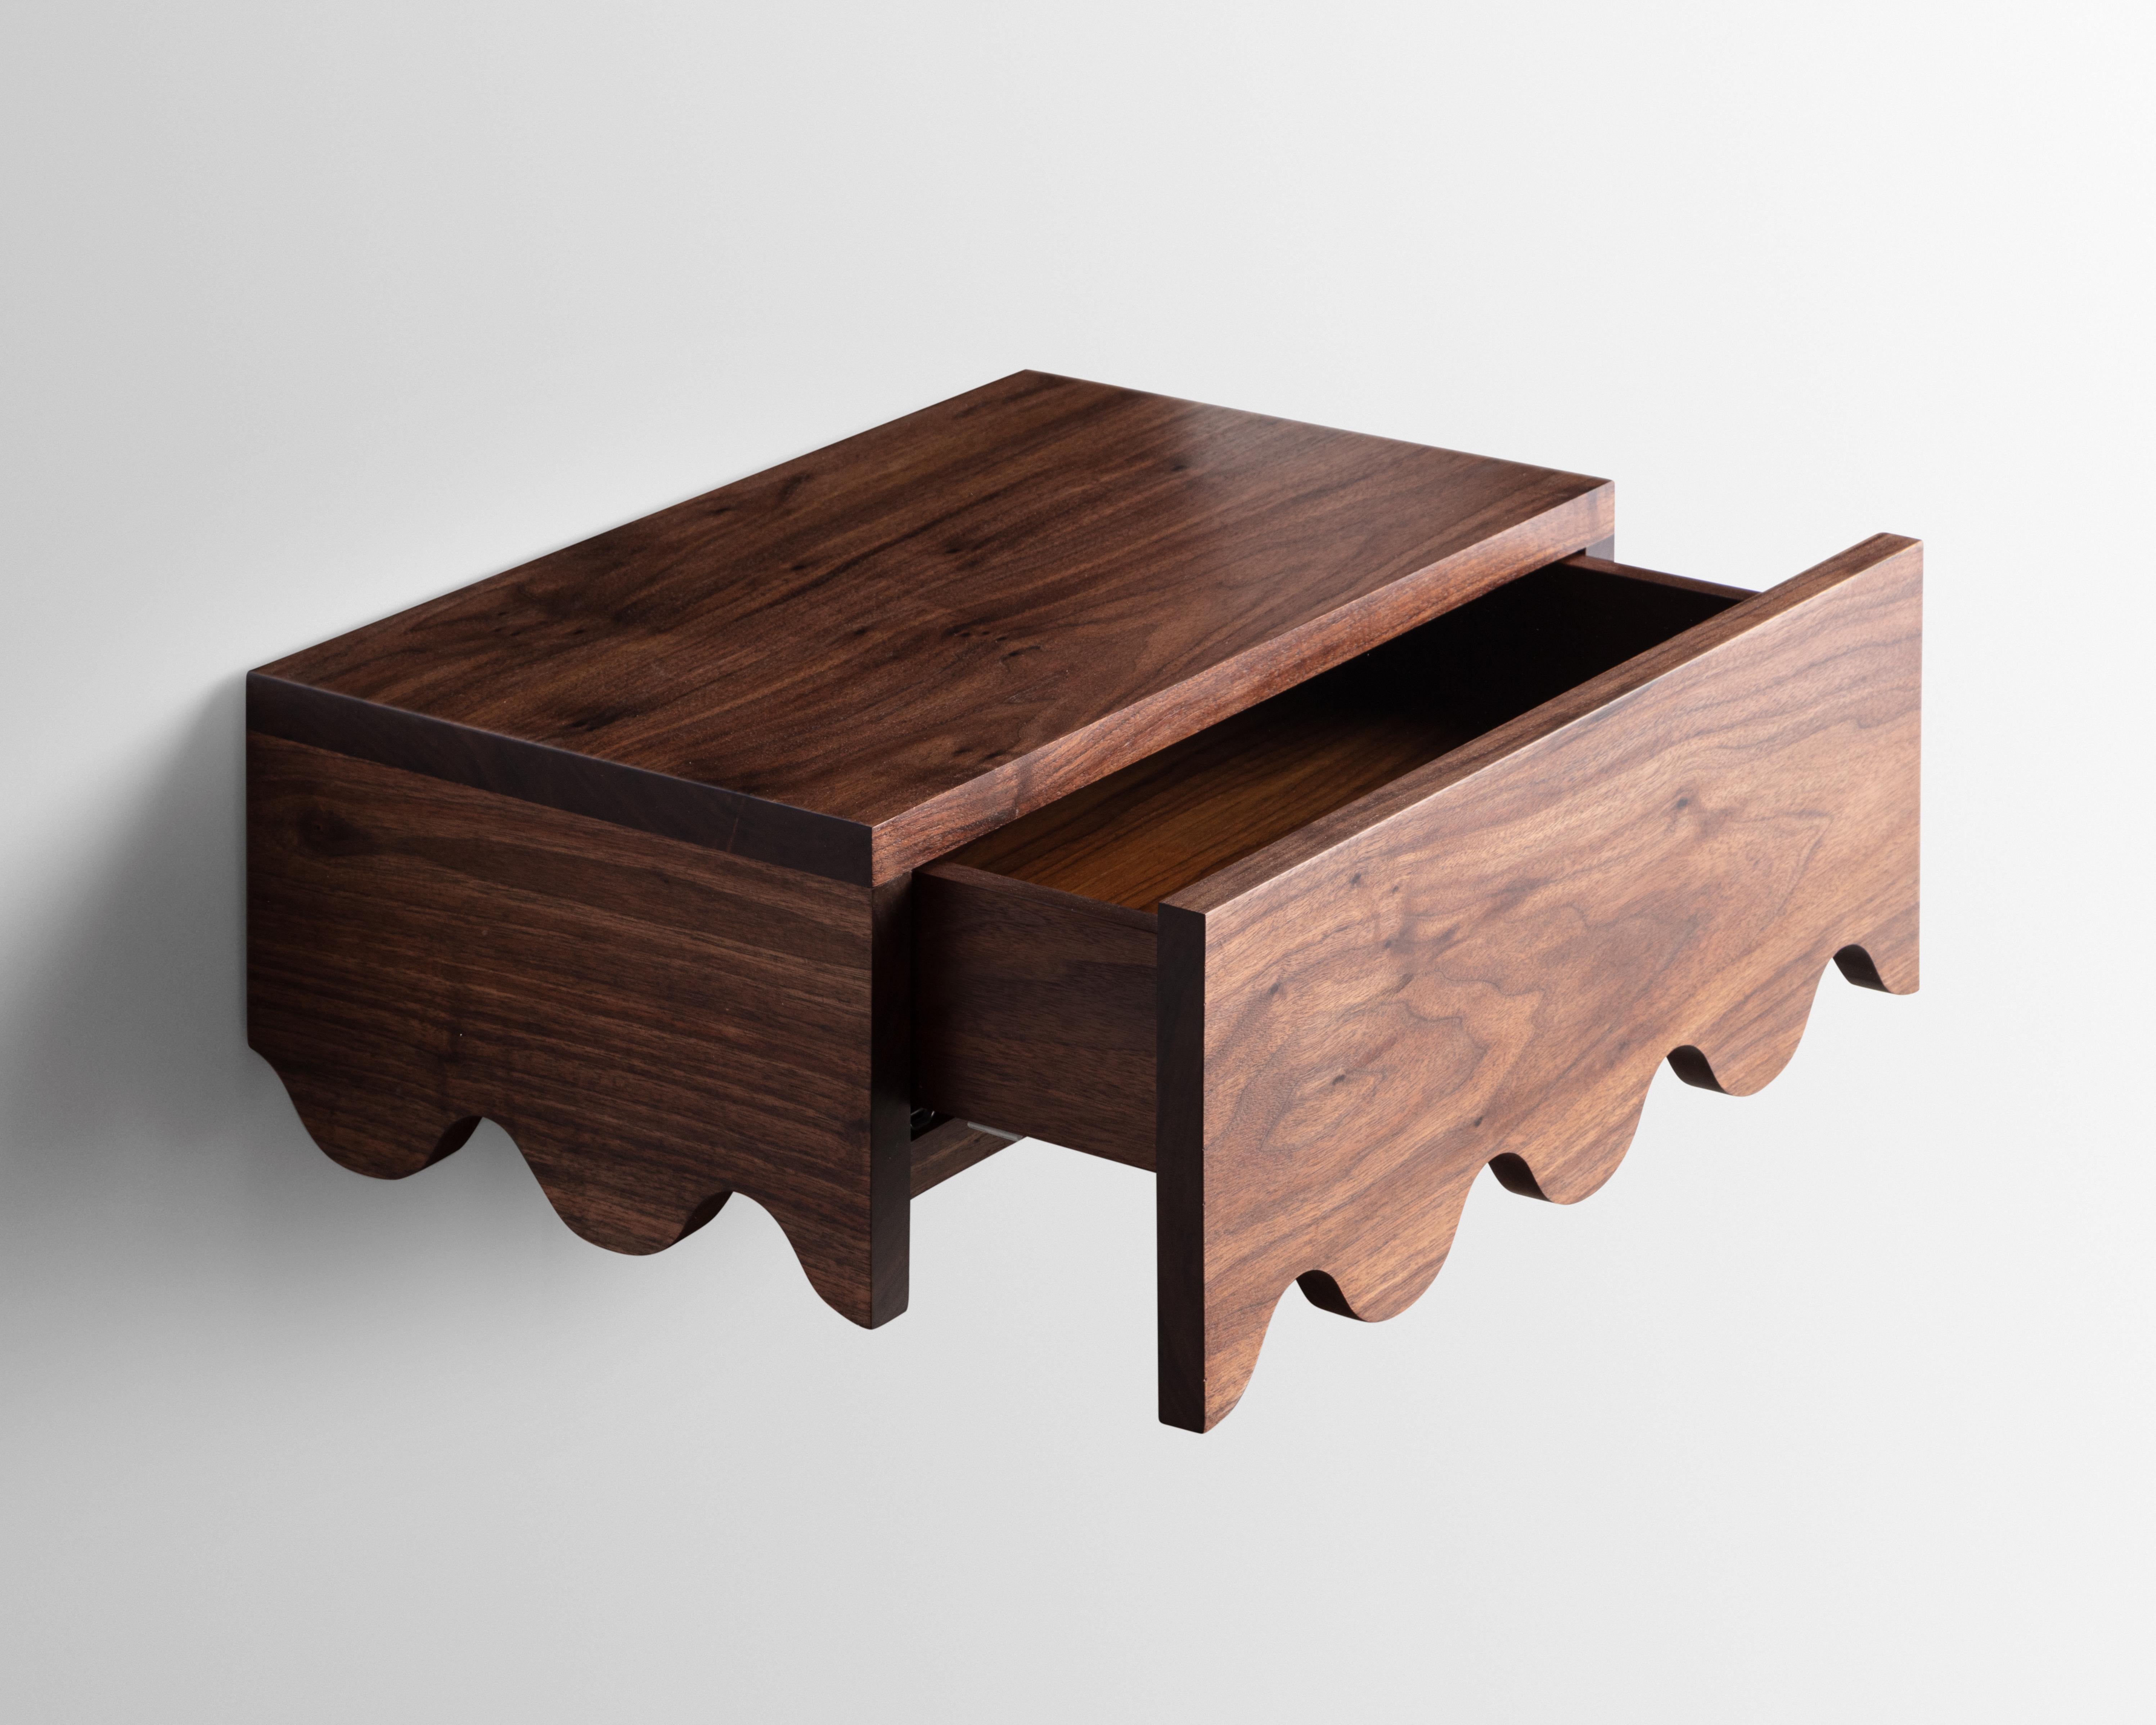 Designed and built in the studio the Squiggle floating nightstand table features a playful detail that continues along its sides and drawer face.

Made from solid Walnut -inspired by the French Mid-century designer Jean Royère.
 